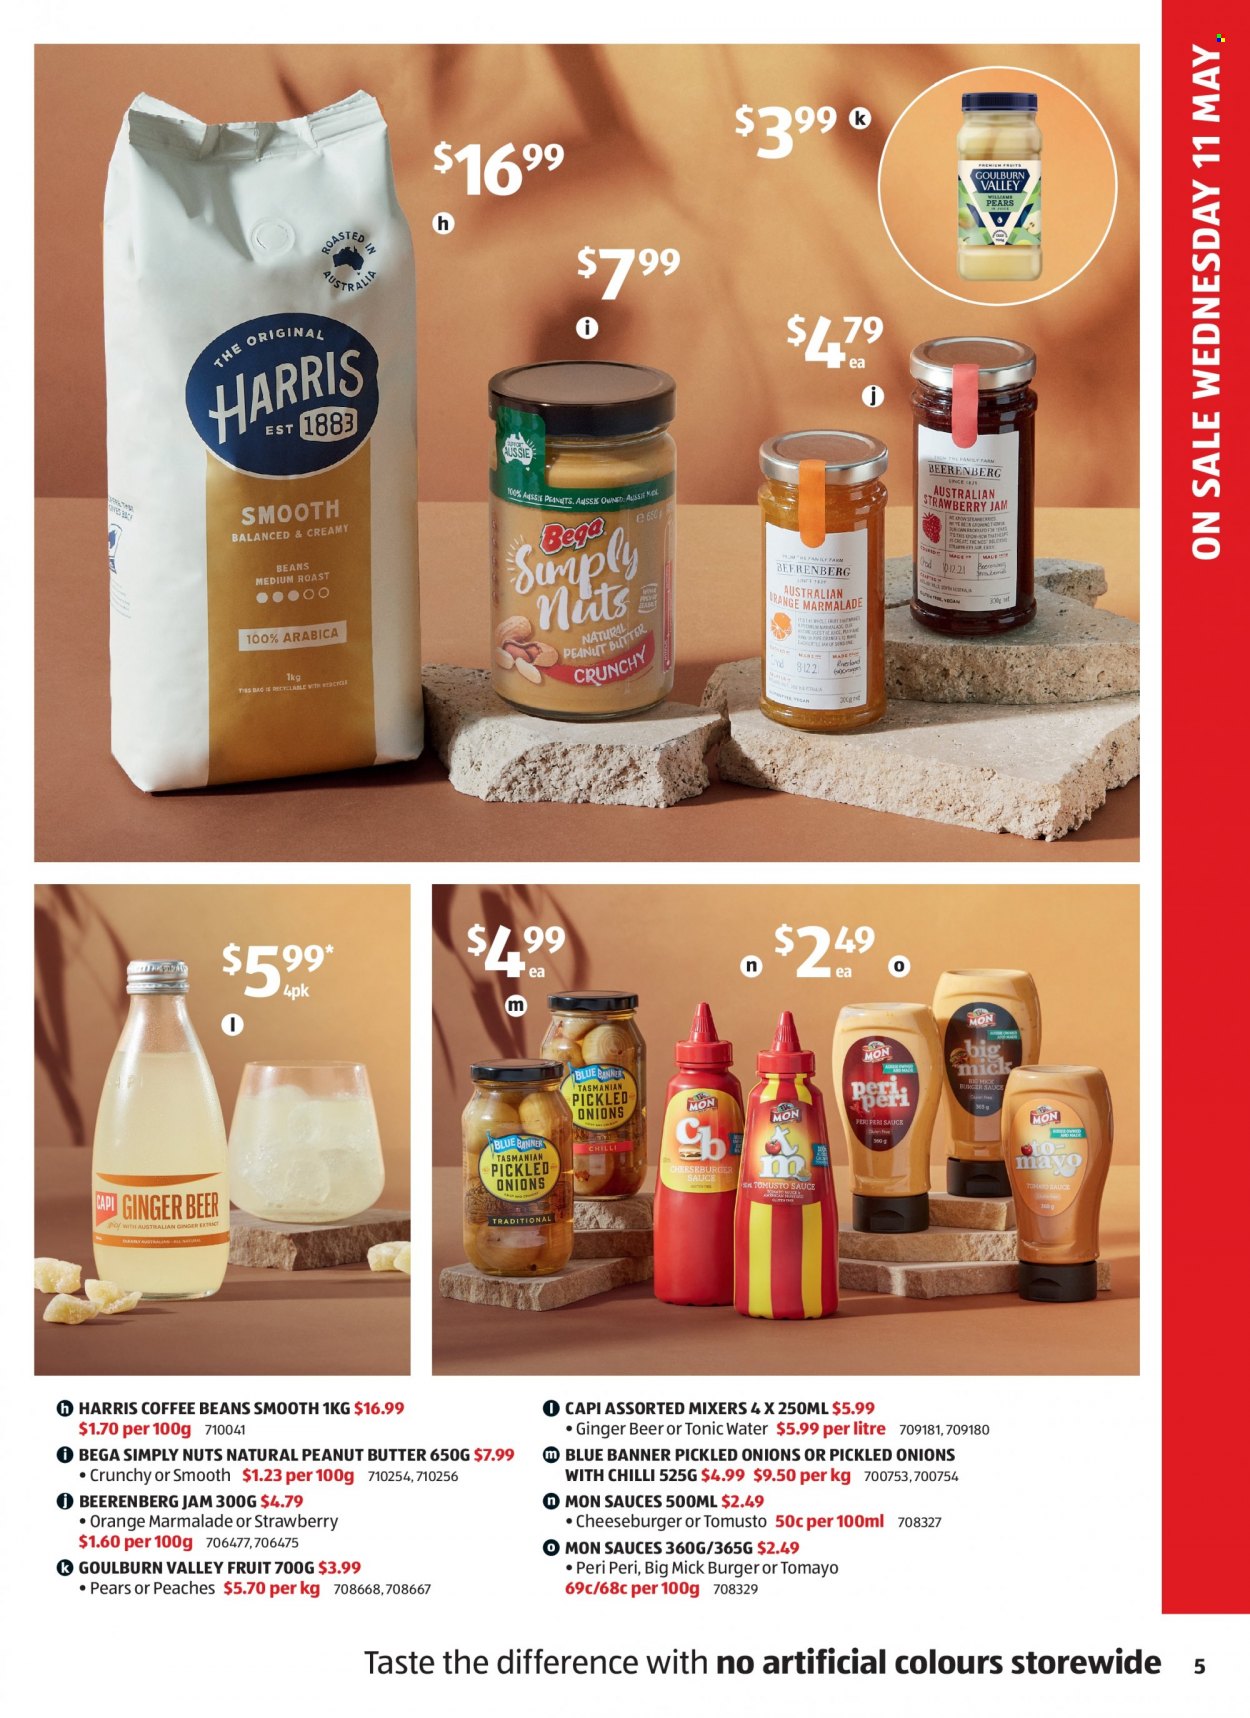 thumbnail - ALDI Catalogue - 11 May 2022 - 17 May 2022 - Sales products - onion, pears, oranges, peaches, cheeseburger, mayonnaise, Harris, strawberry jam, peri peri sauce, fruit jam, peanut butter, peanuts, juice, tonic, coffee beans, beer, Aussie, pipe, ginger beer. Page 5.